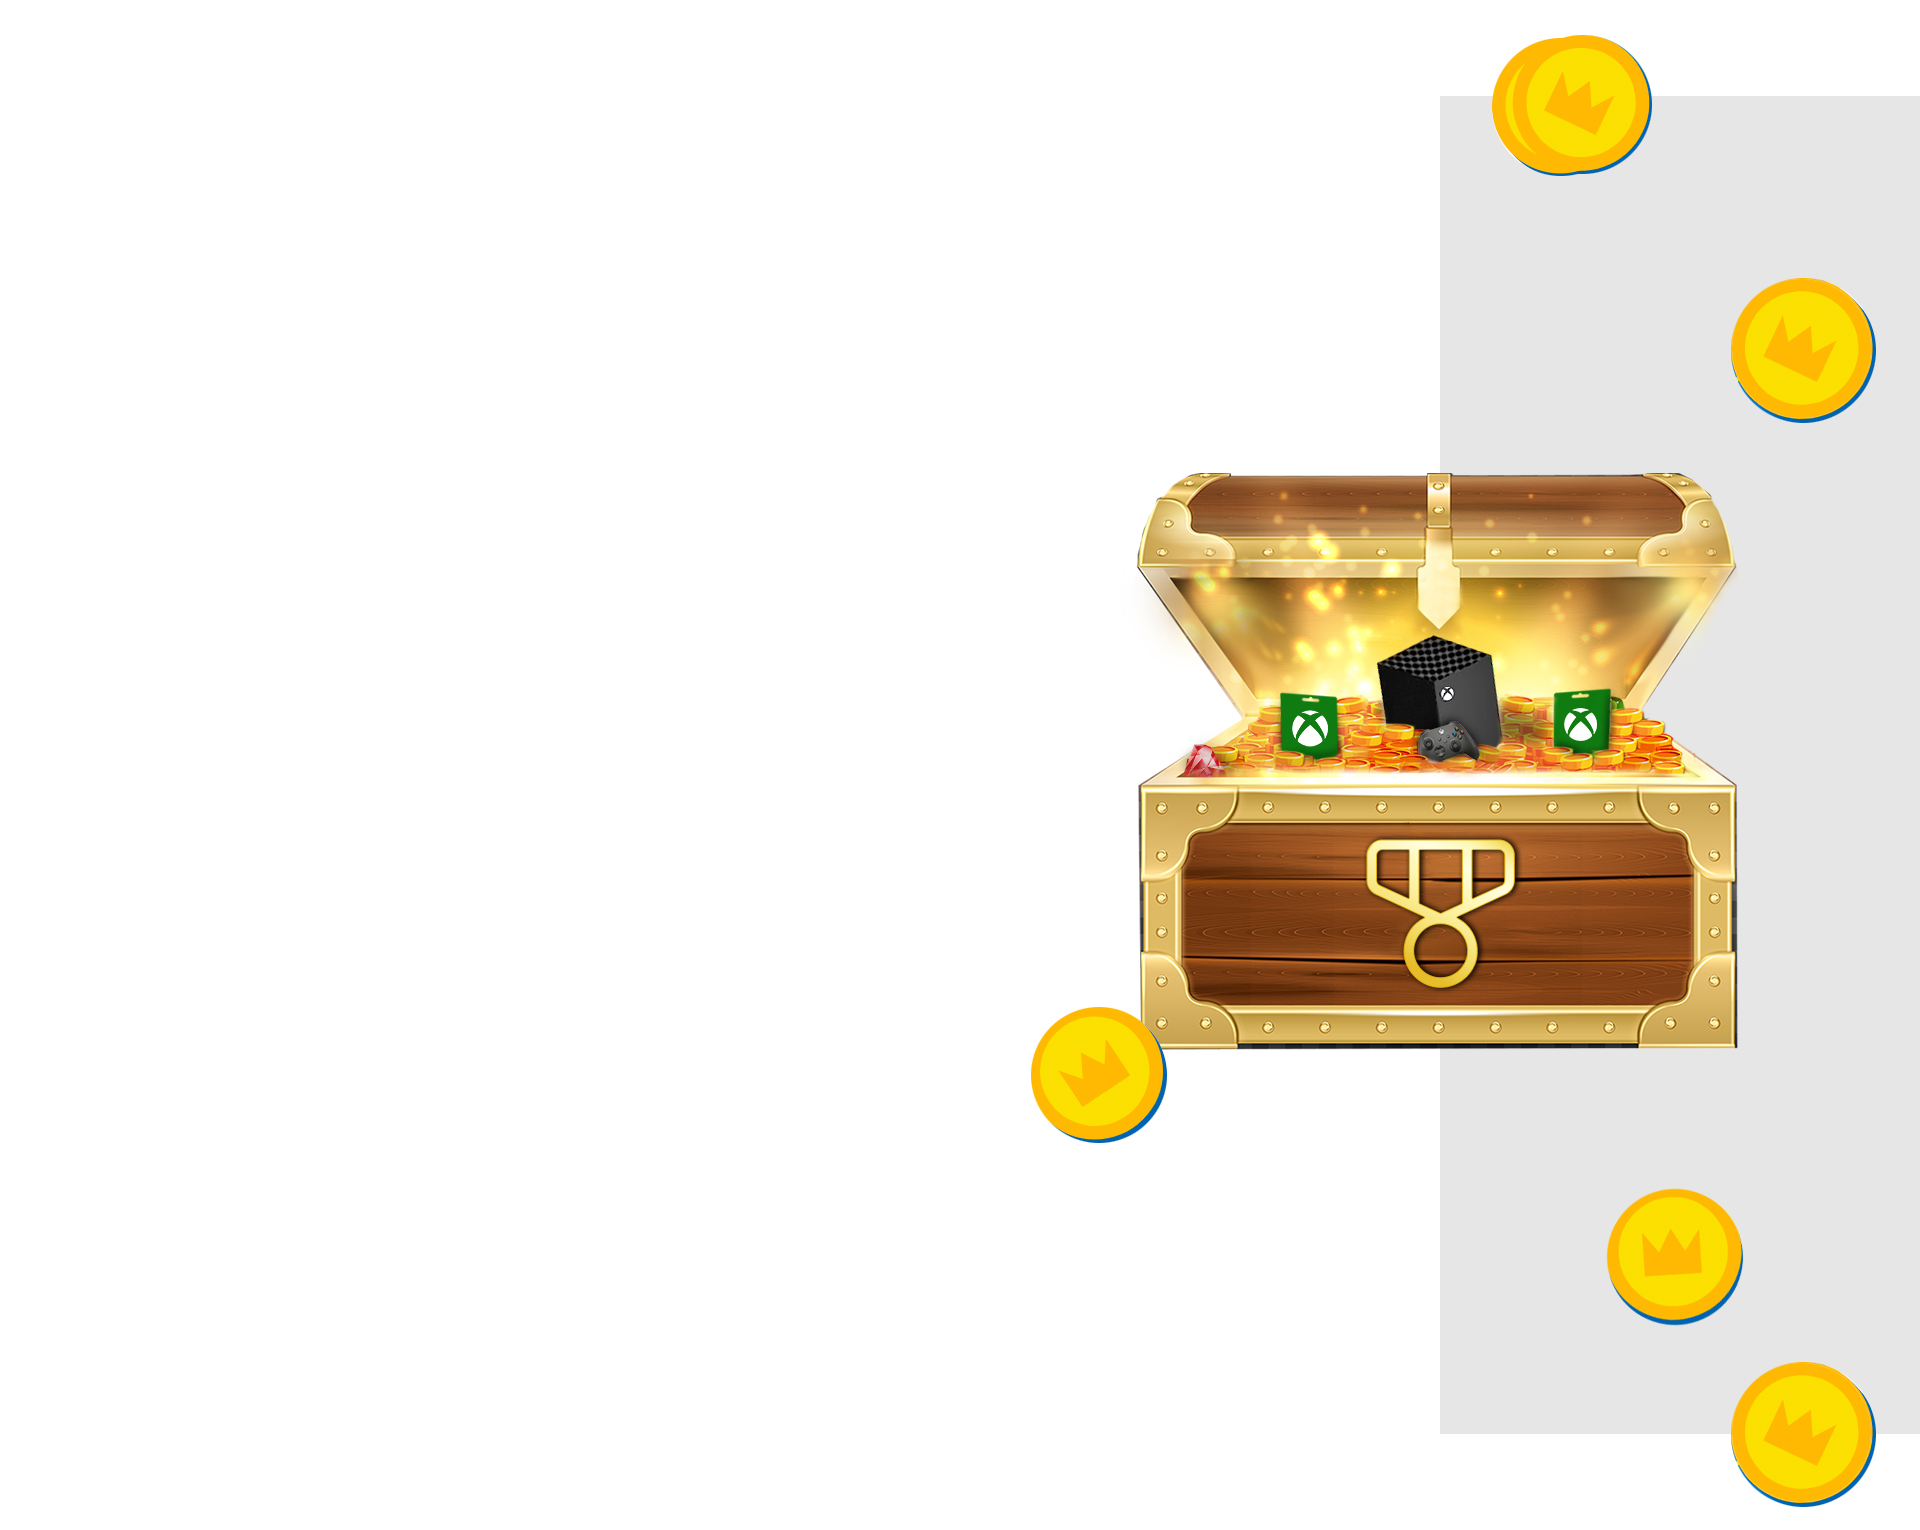 A treasure chest overflowing with coins, Xbox gift cards, an Xbox Series X console, and an Xbox controller